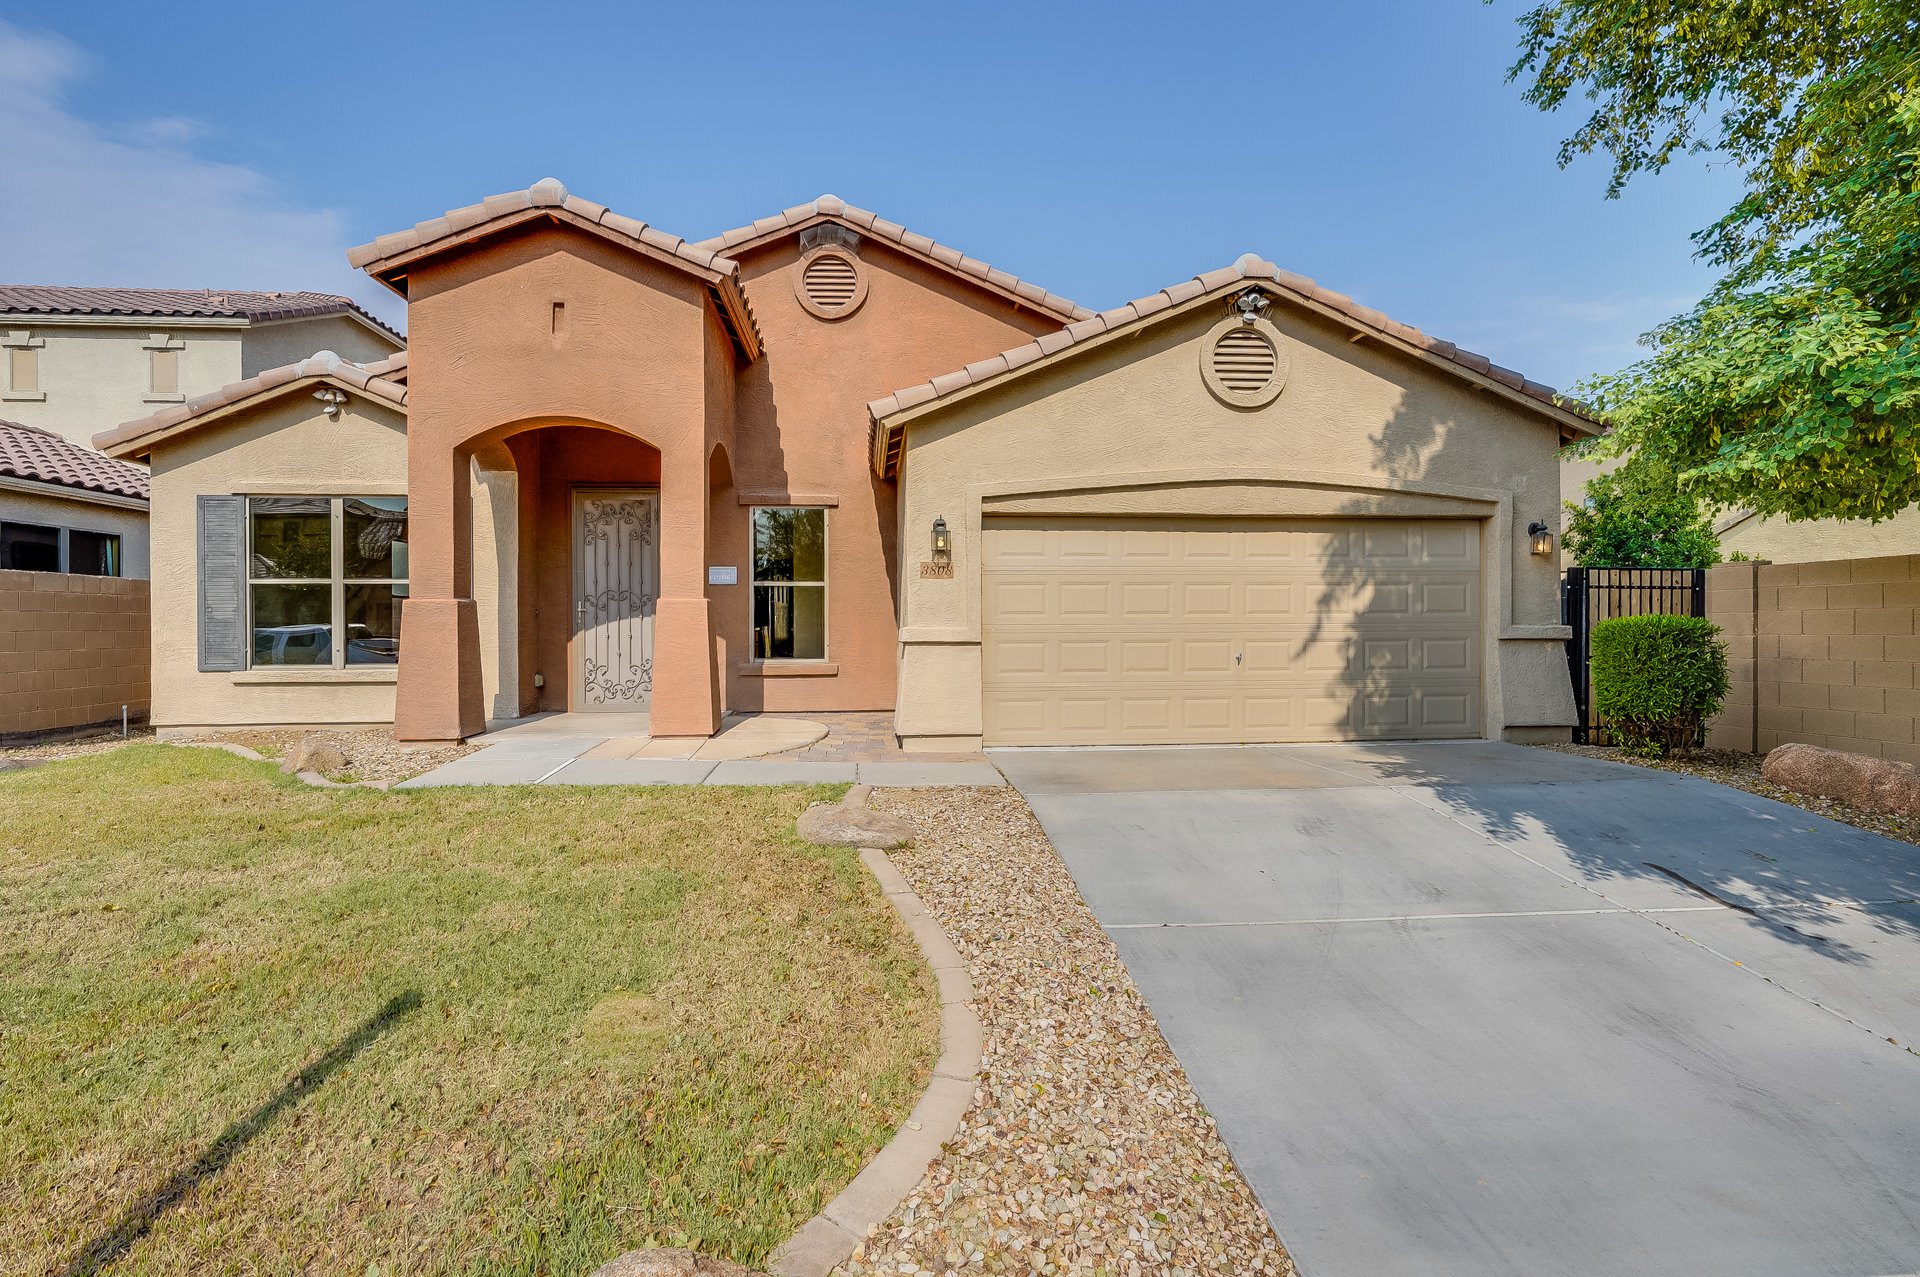 Photo 1 of 26 - 3808 S 99th Dr, Tolleson, AZ 85353